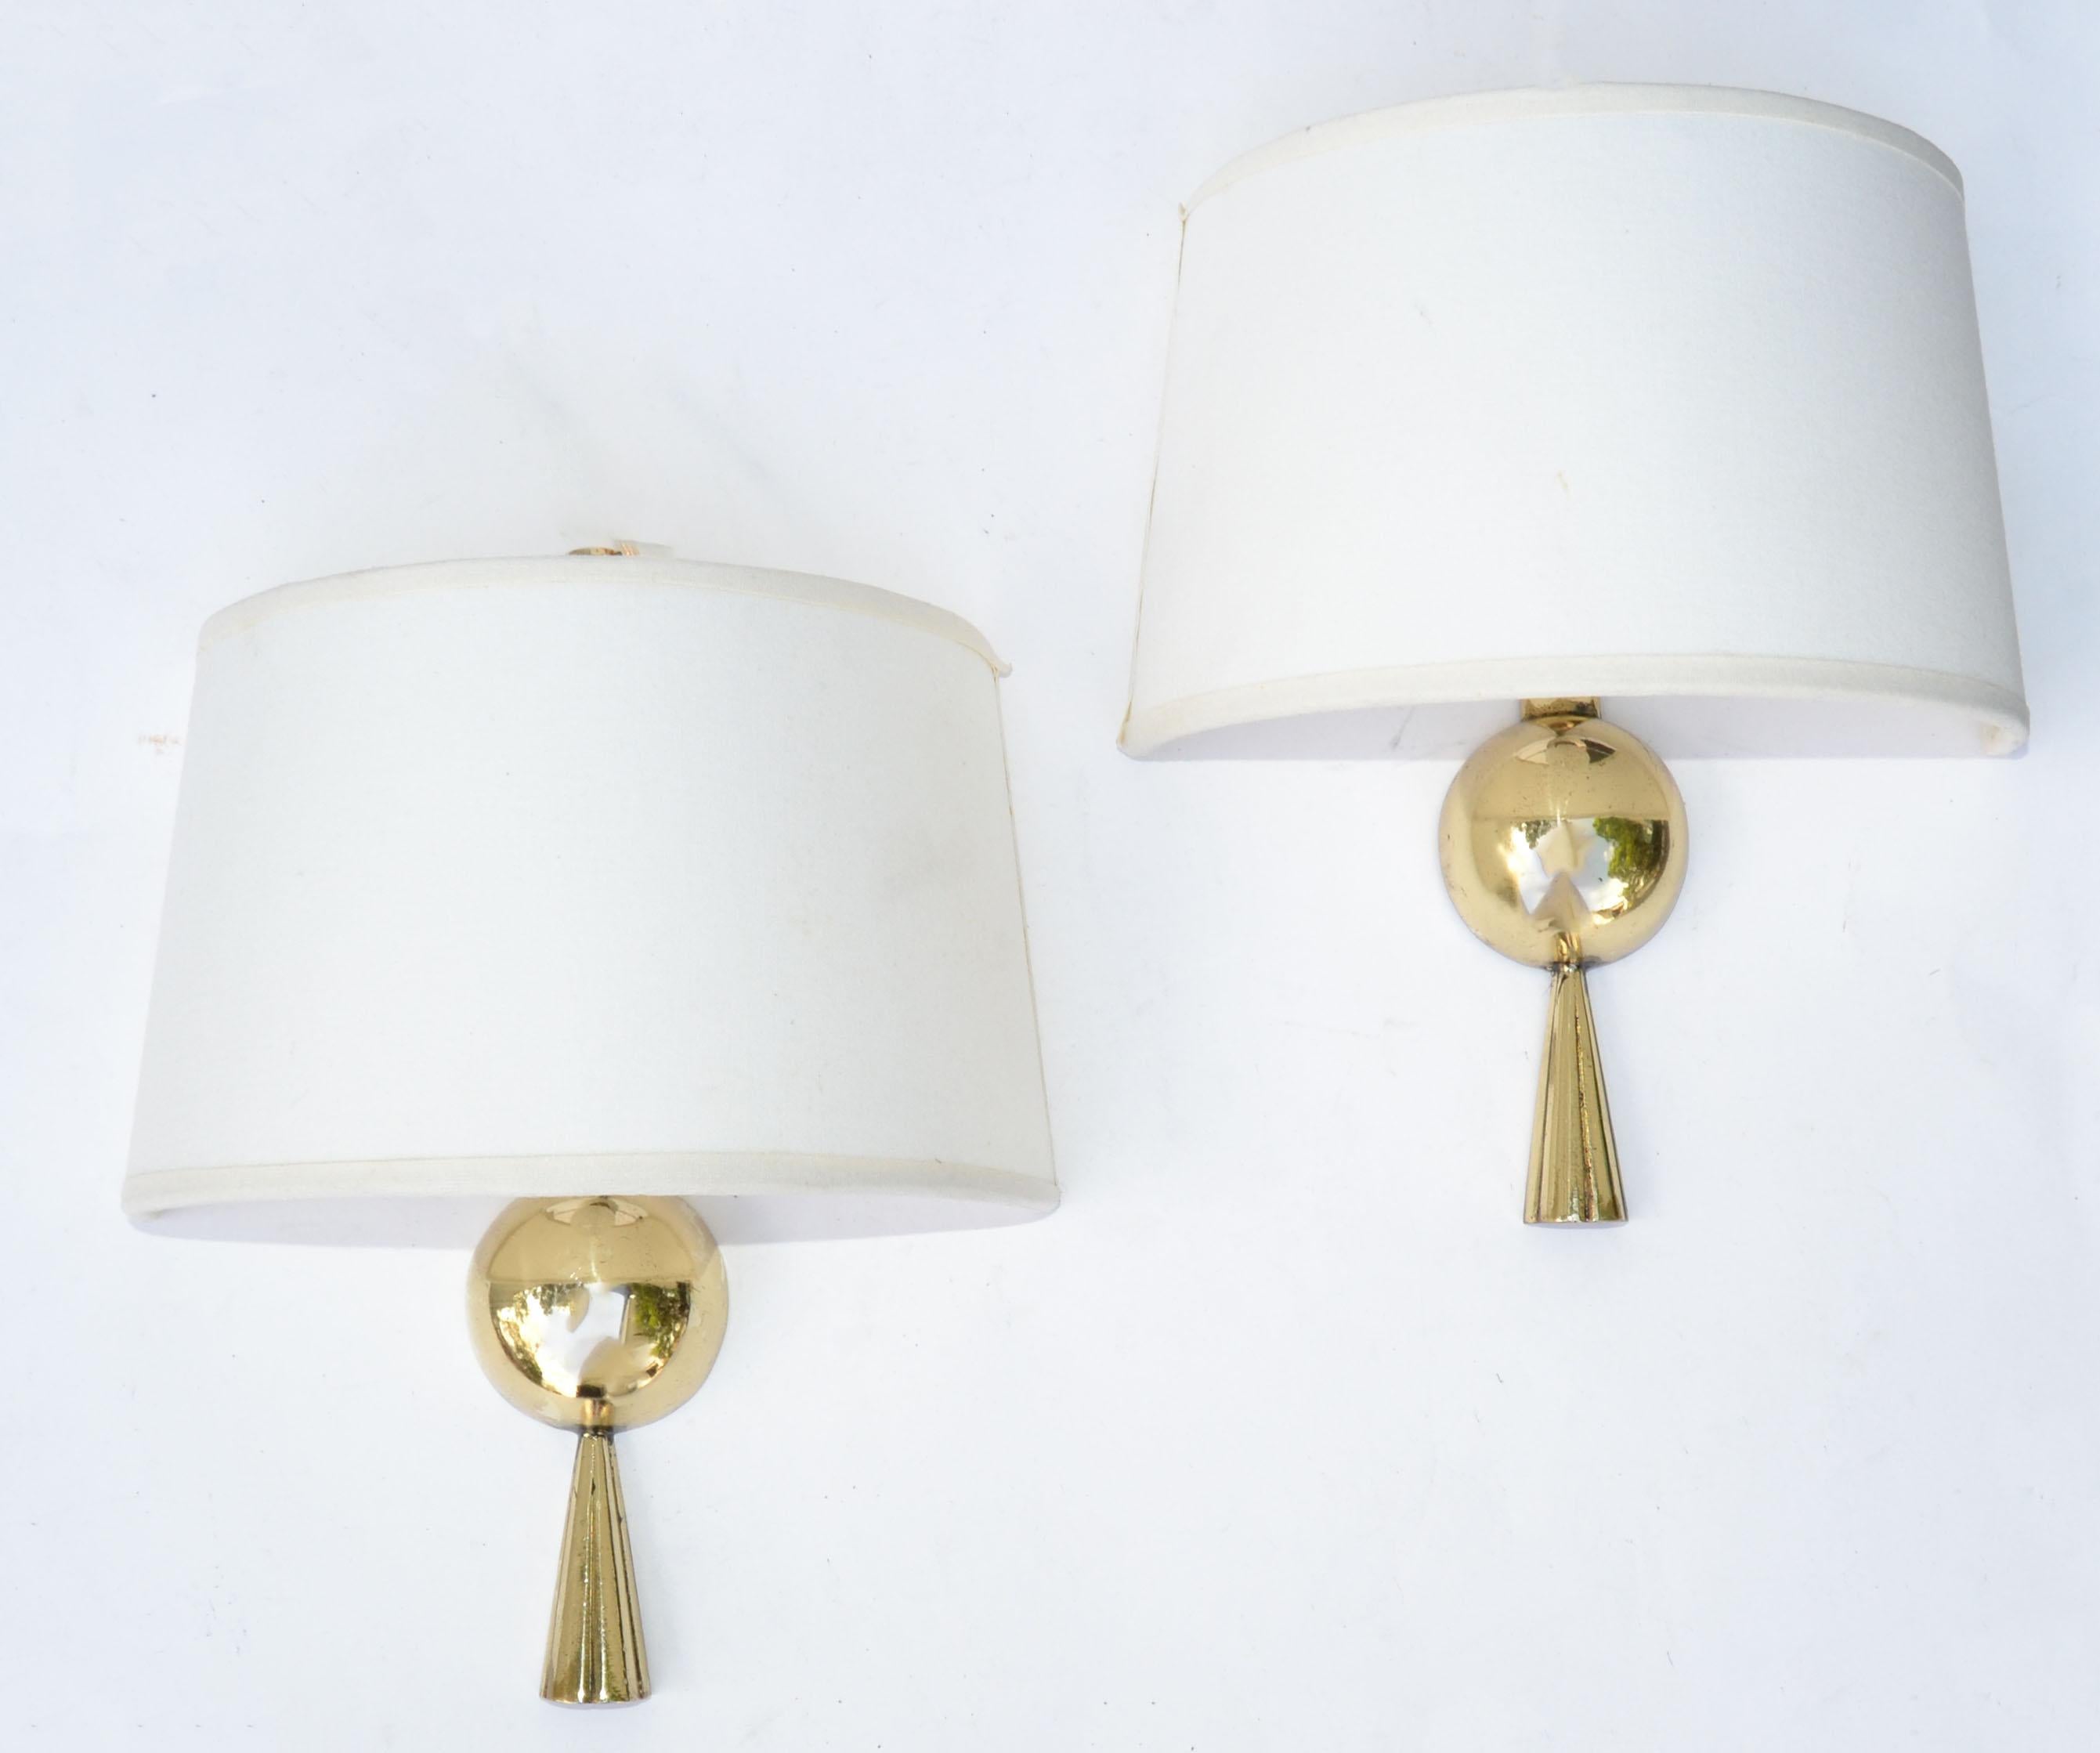 Pair of Polished Bronze sconces, wall lamps signed by Marcel Guillemard.
In working condition and each takes a max. 60 watts candelabra light bulb.
Sold with newly made Custom Shades.
Measures: 8 x 5 x 4 inches Height.
Projection from the wall: